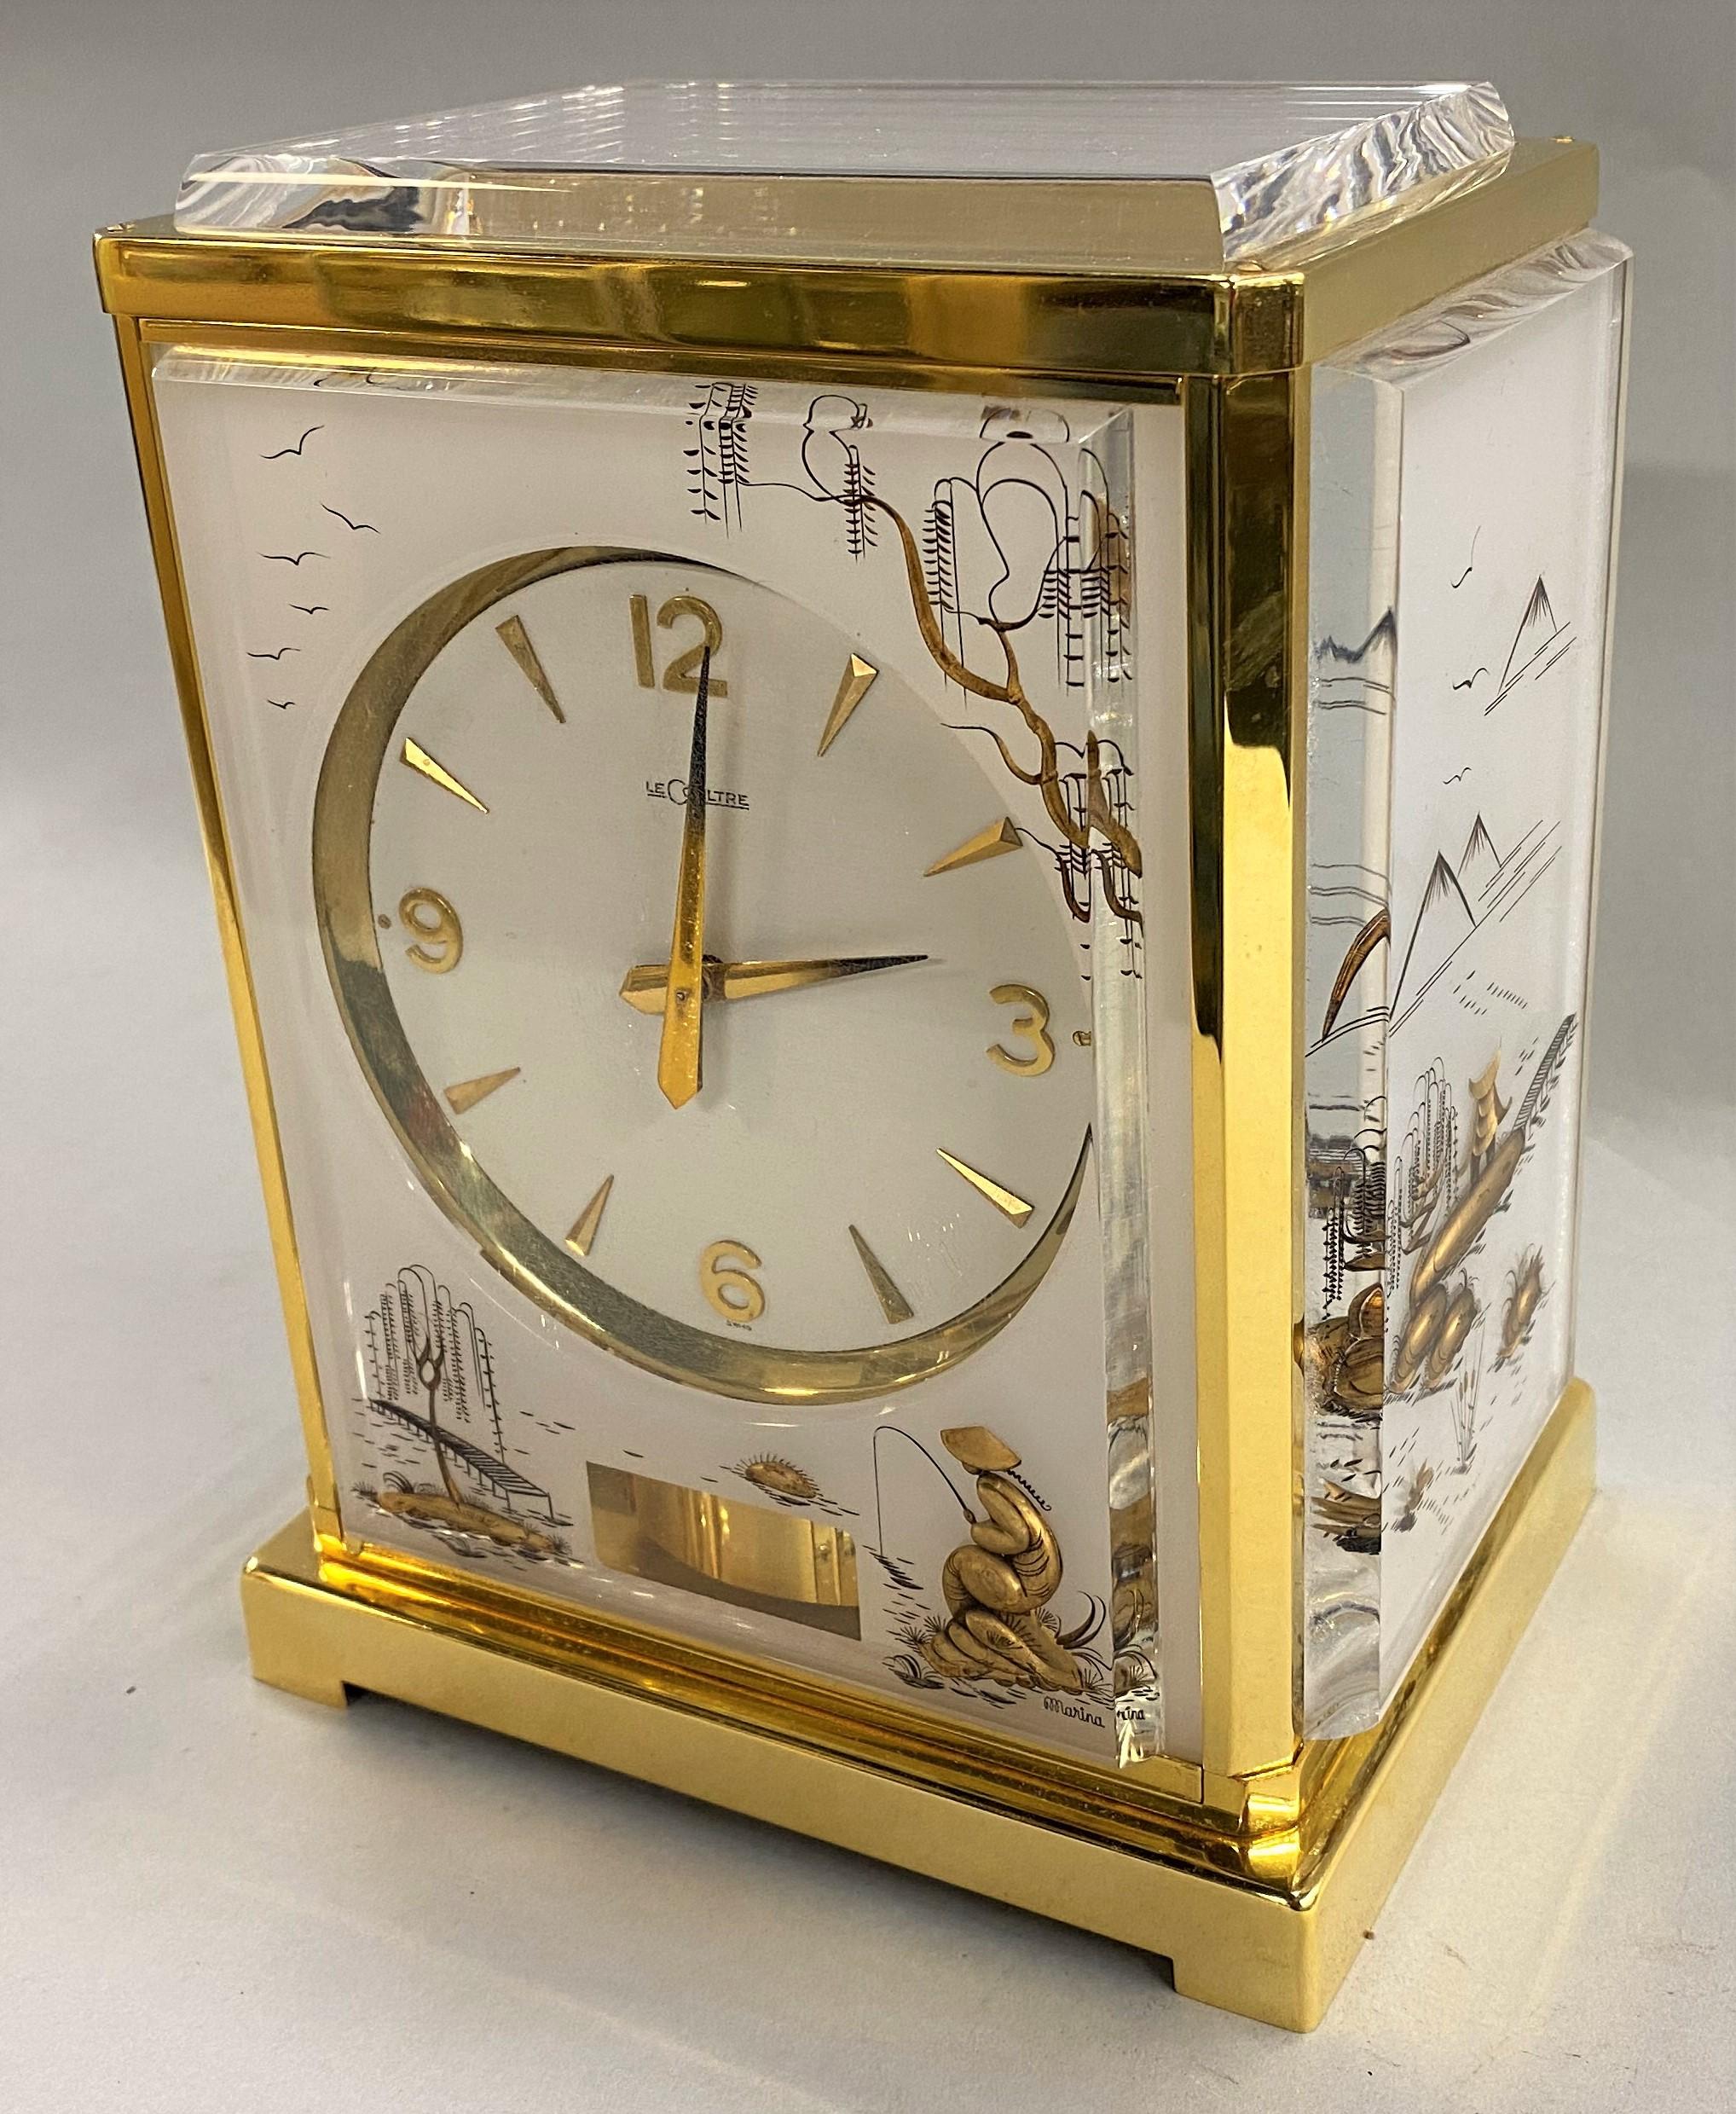 A fine Jaeger-LeCoultre white Marina Atmos perpetual motion clock with an oriental design. The clock has mounted stylized lucite panels with oriental or Asian design, its movement wound by barometric pressure. The front panel has an aperture to view